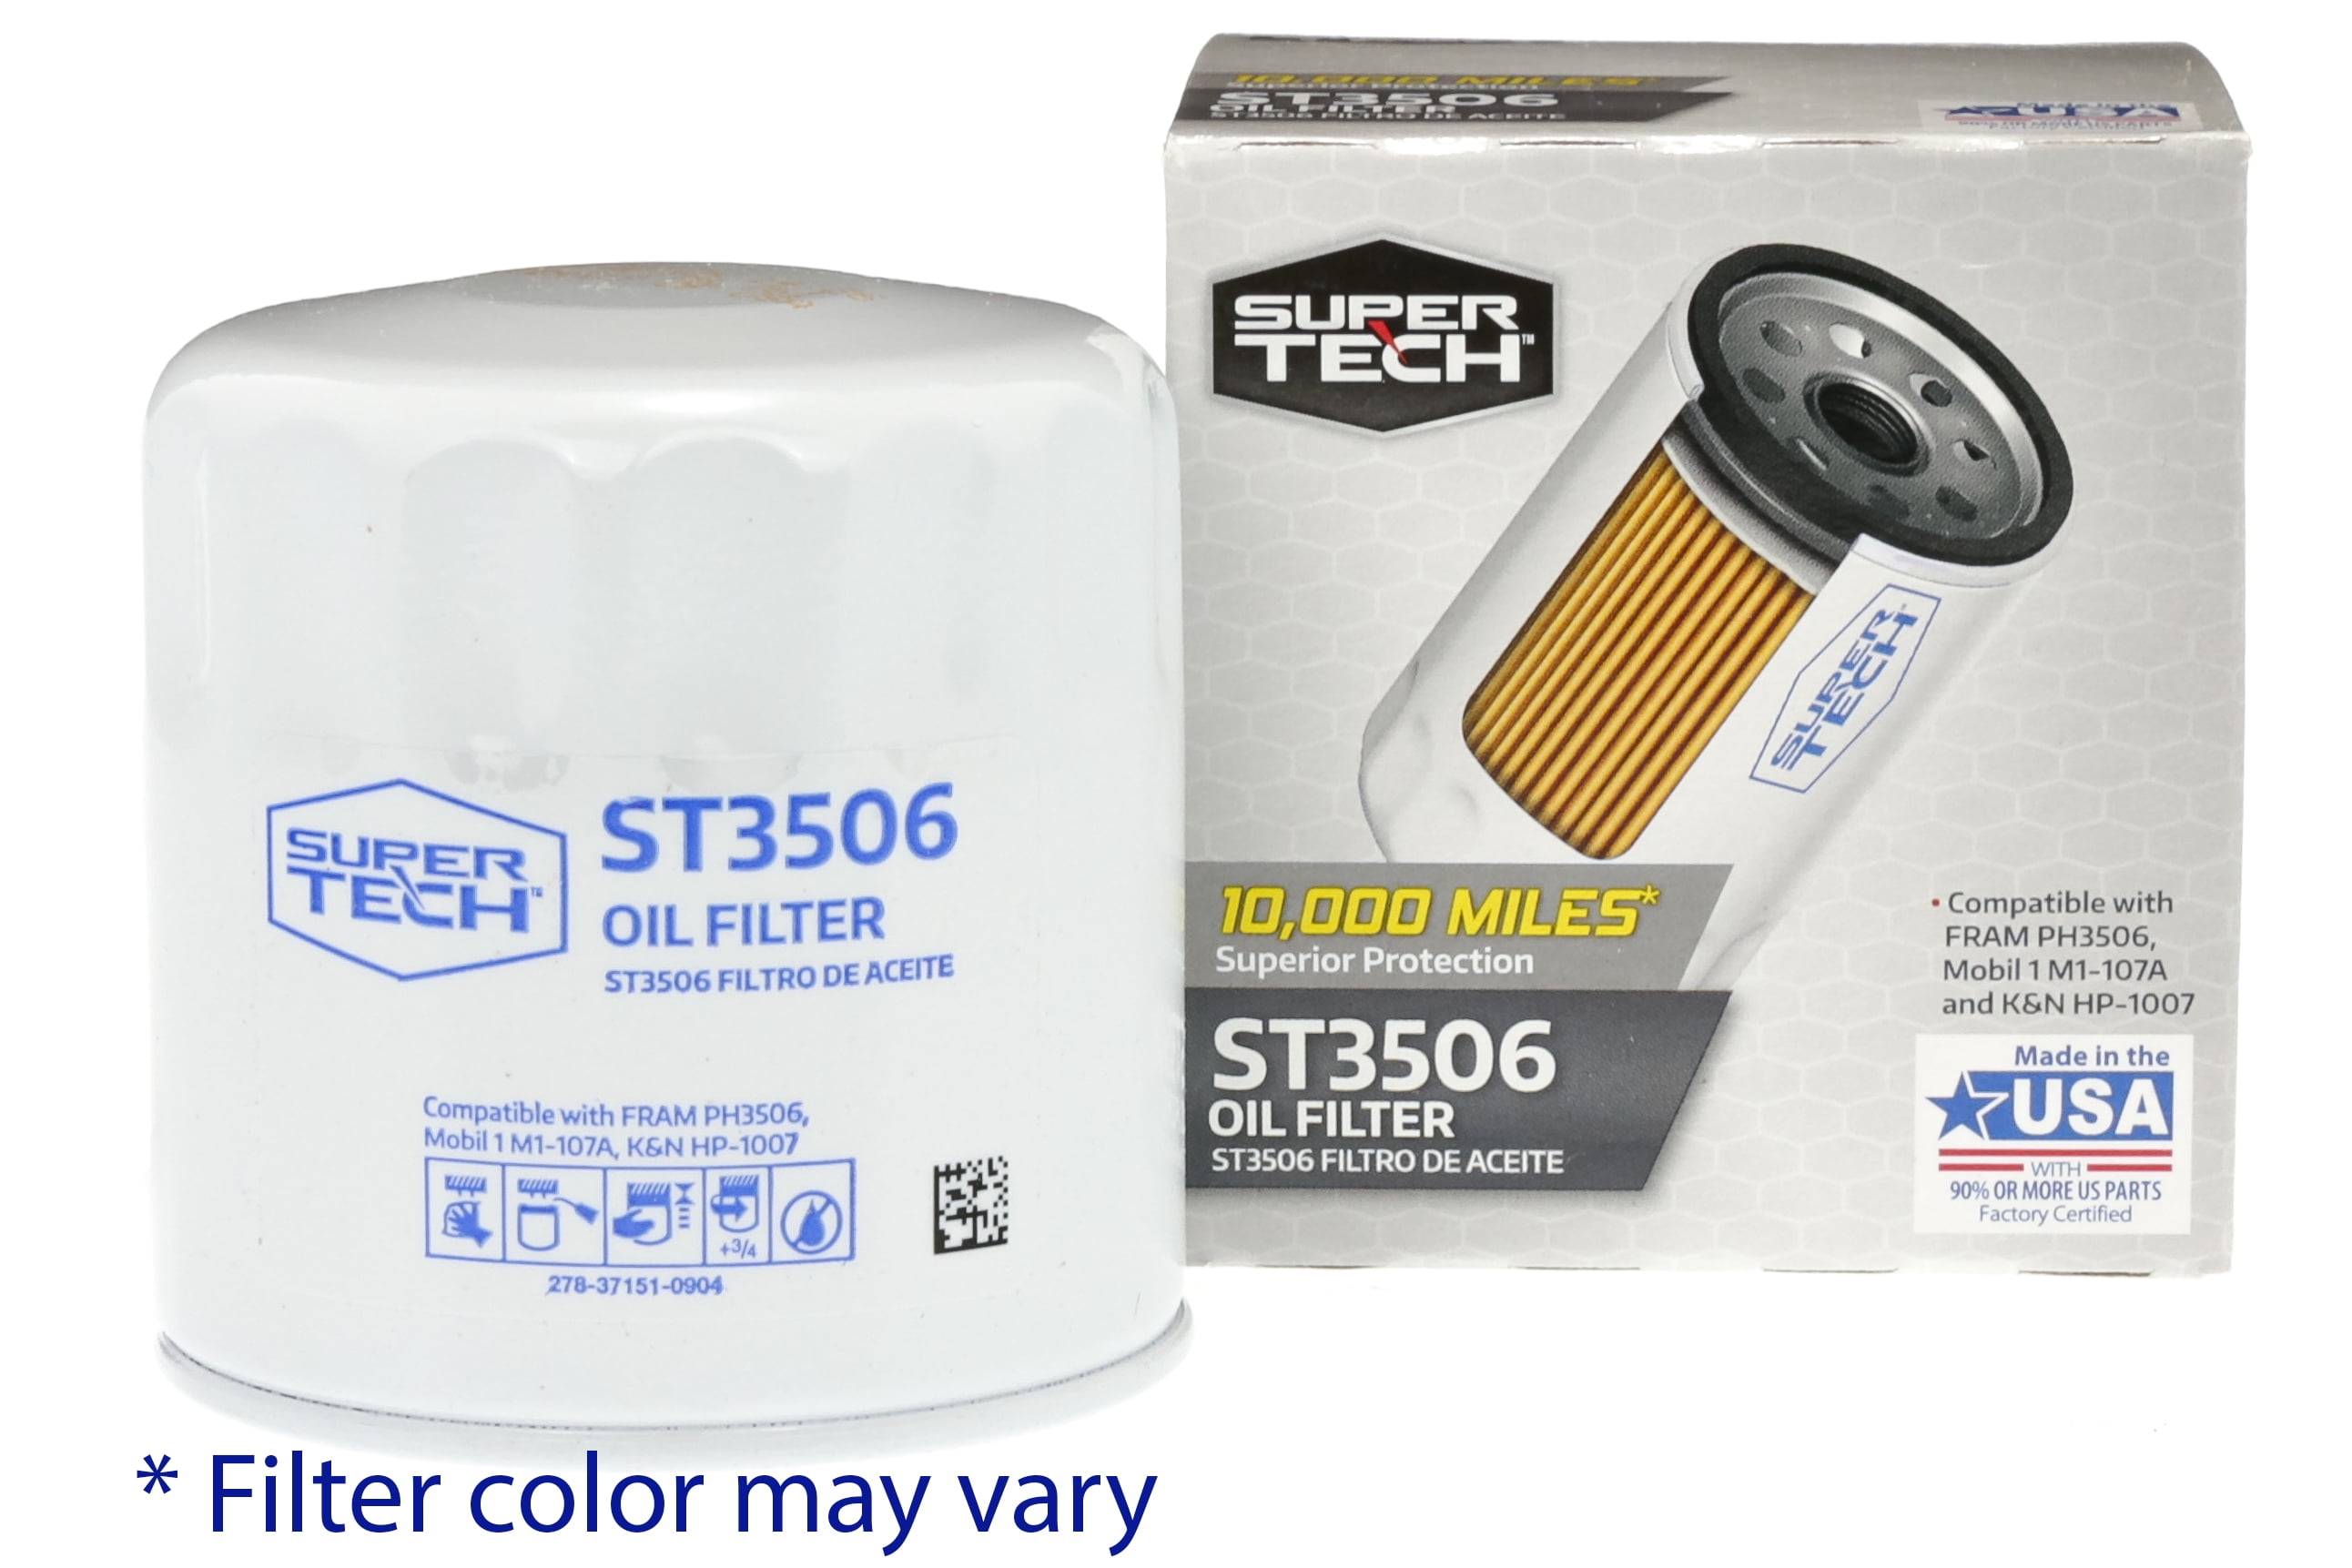 SuperTech ST3506, Oil Filter Fits Buick, Cadillac, Chevrolet, GMC, Jeep, Oldsmobile and Pontiac